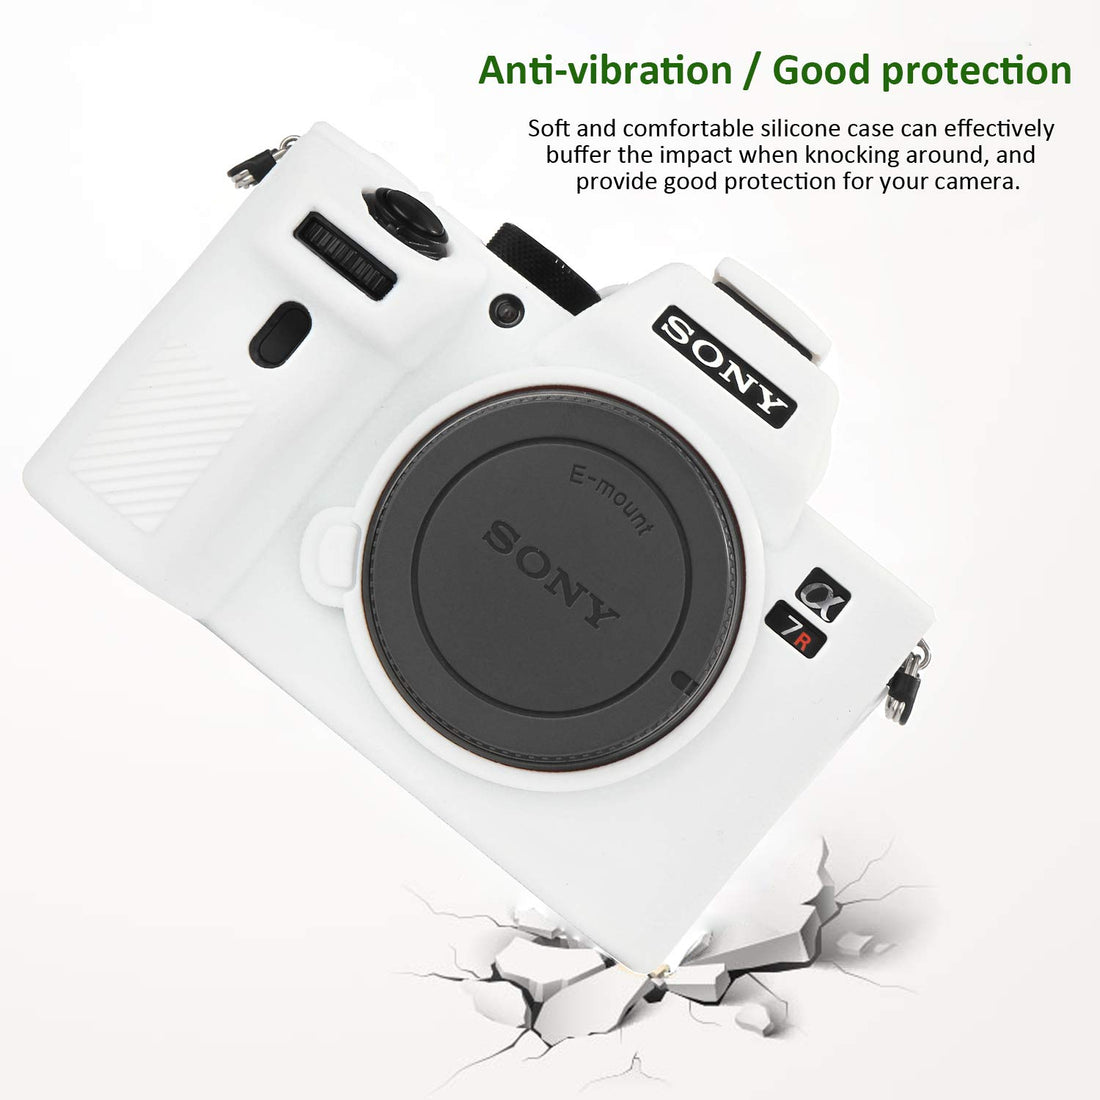 Easyhood Camera Case for Sony A7 iii A7 riii Sony ILCE-7RIII A73 A7R3 Soft Silicone Rubber Camera Protective Body Case Skin Camera Bag Protector Cover (White)